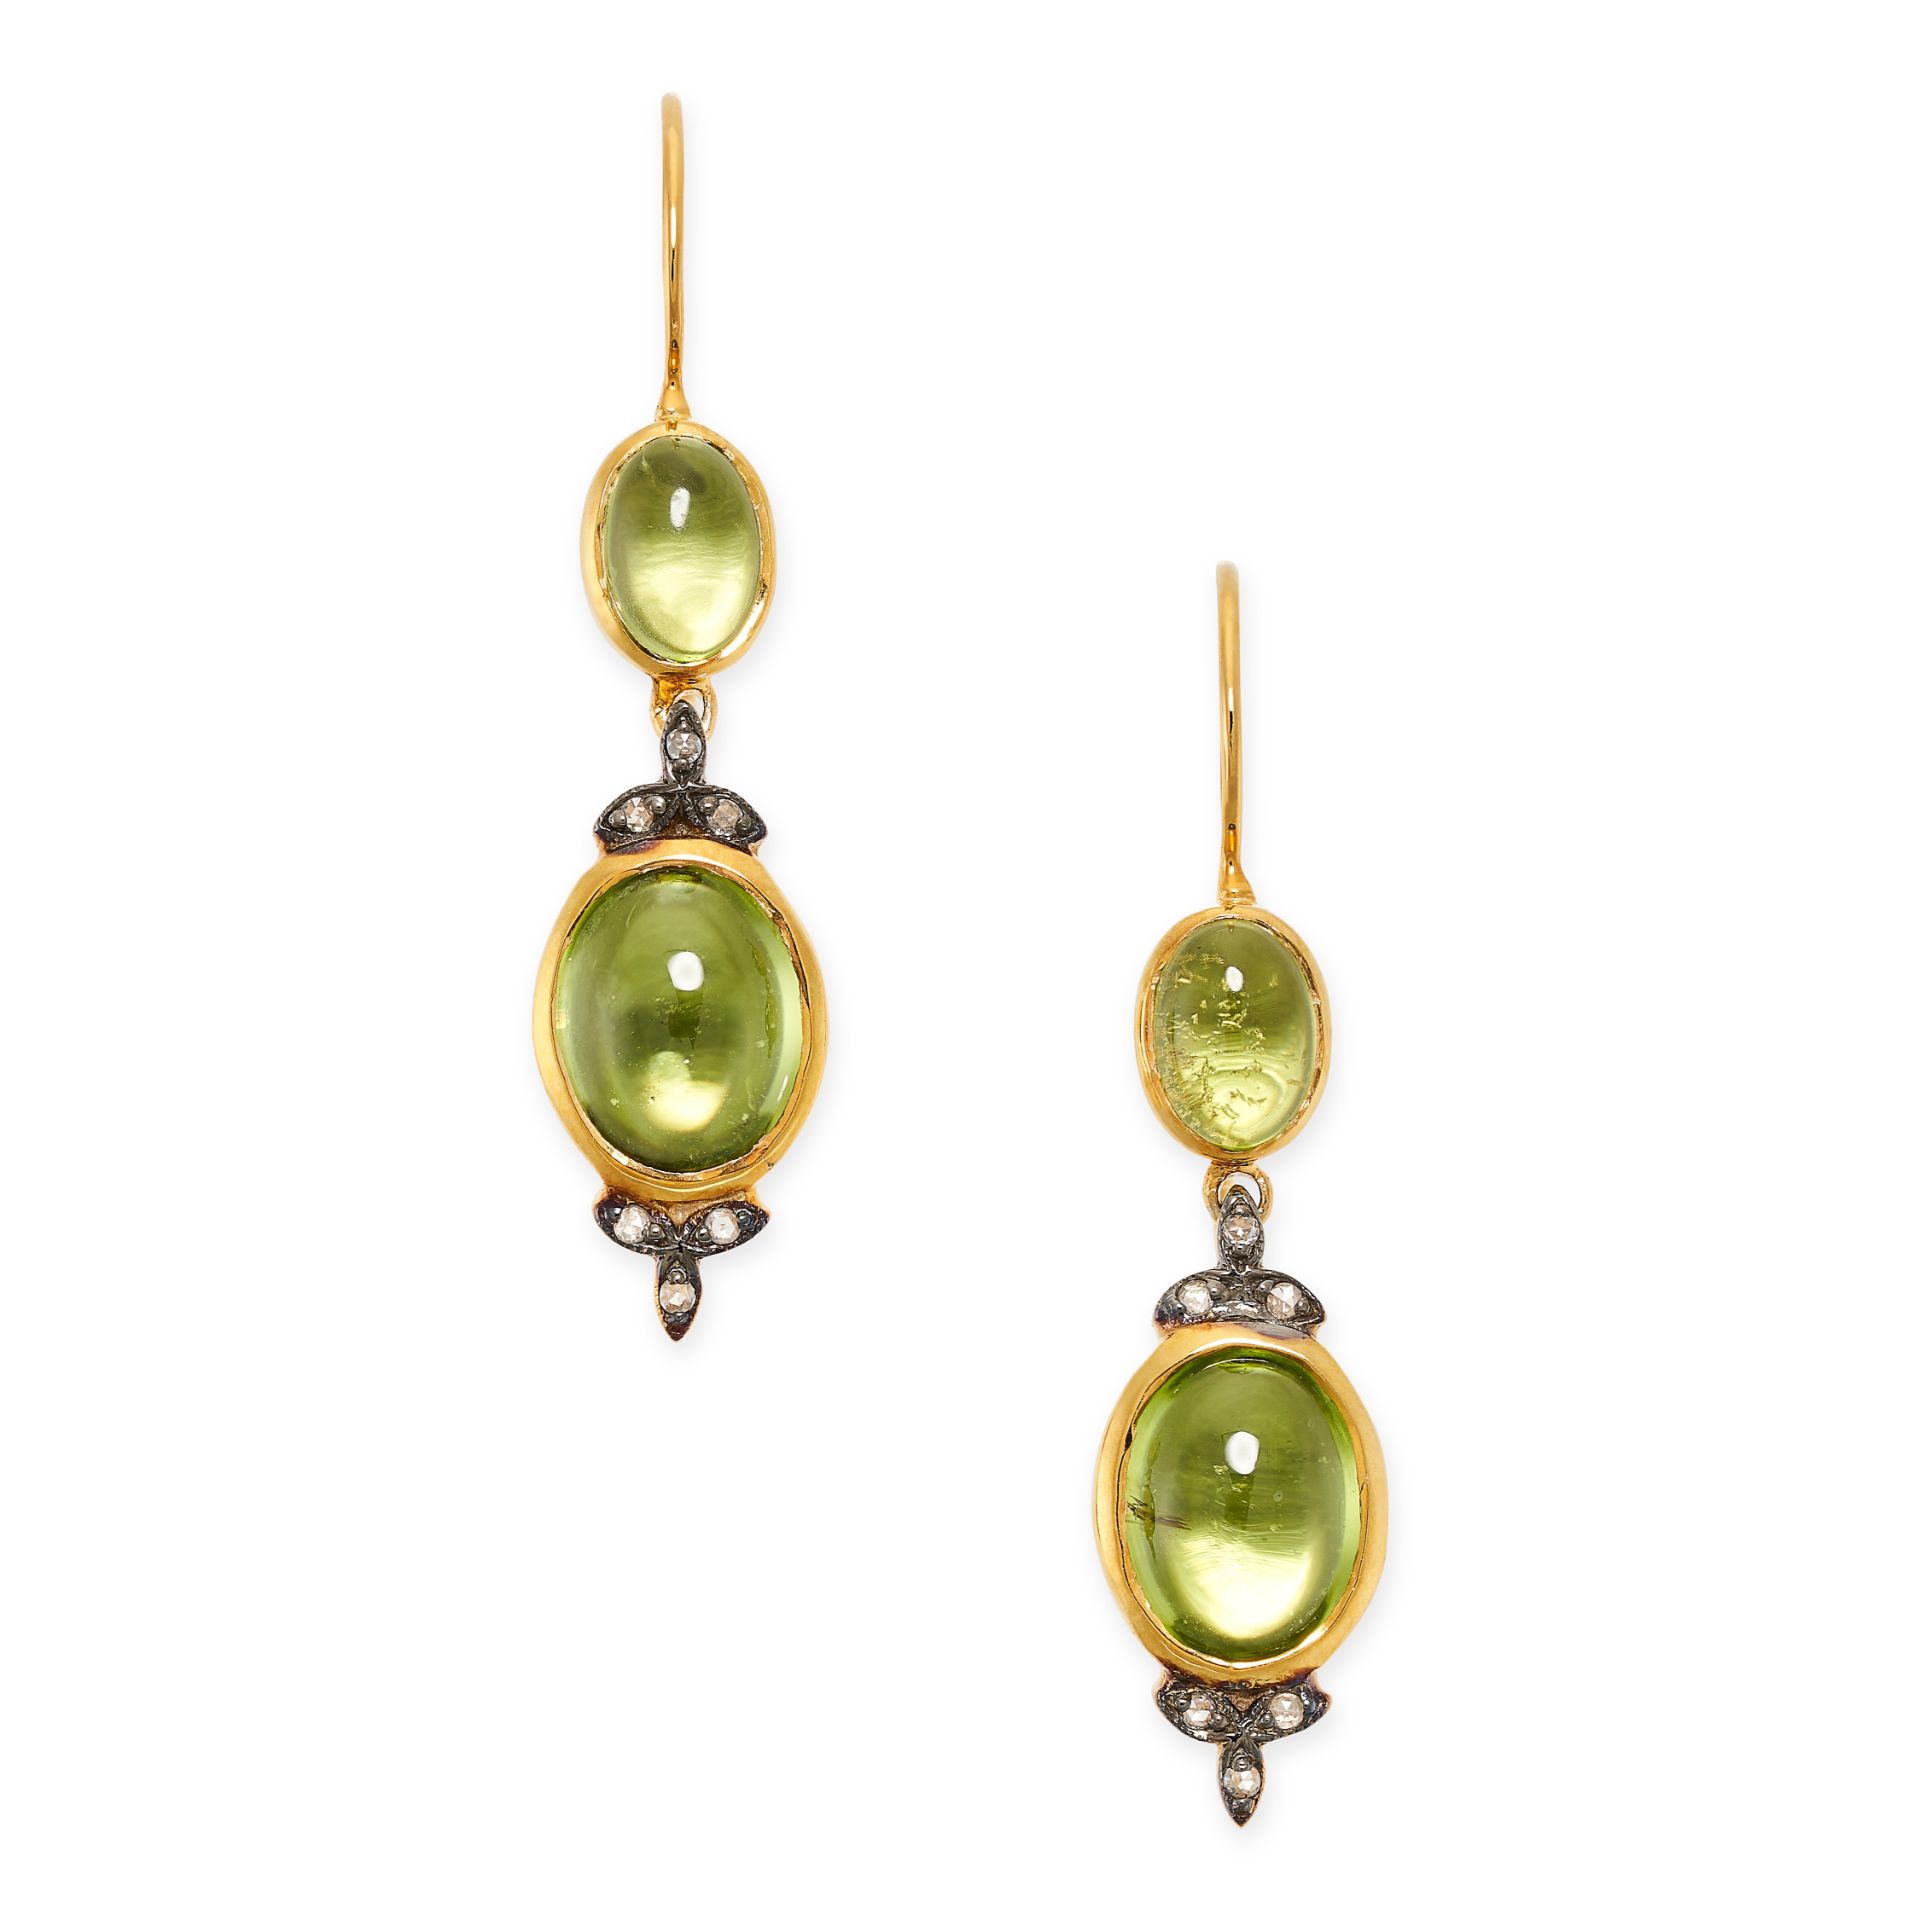 A PAIR OF PERIDOT AND DIAMOND DROP EARRINGS in silver and yellow gold, each set with two graduated